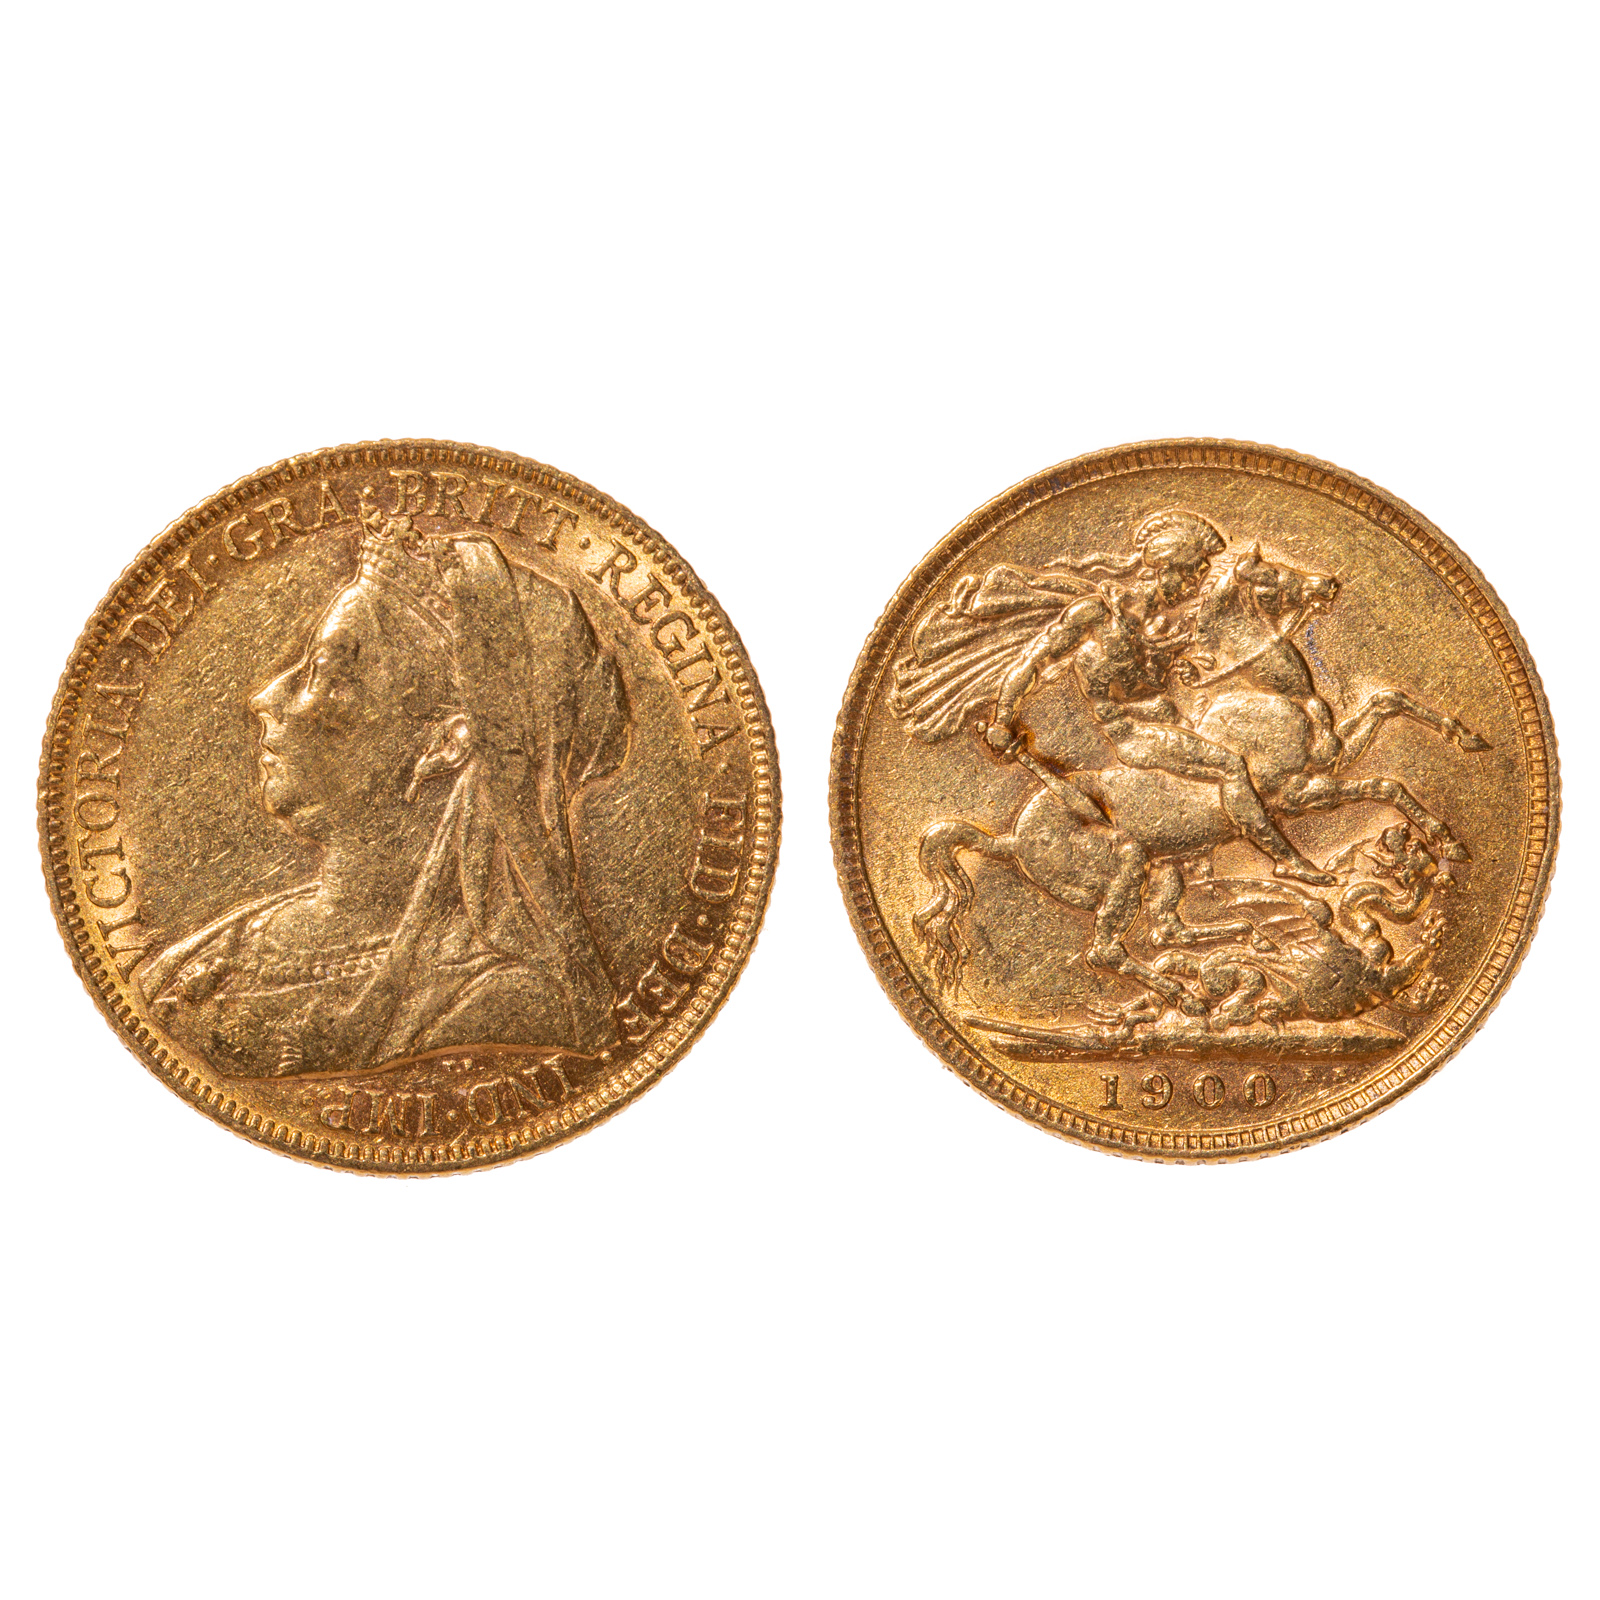 1900 GOLD SOVEREIGN FROM LONDON 287d6f